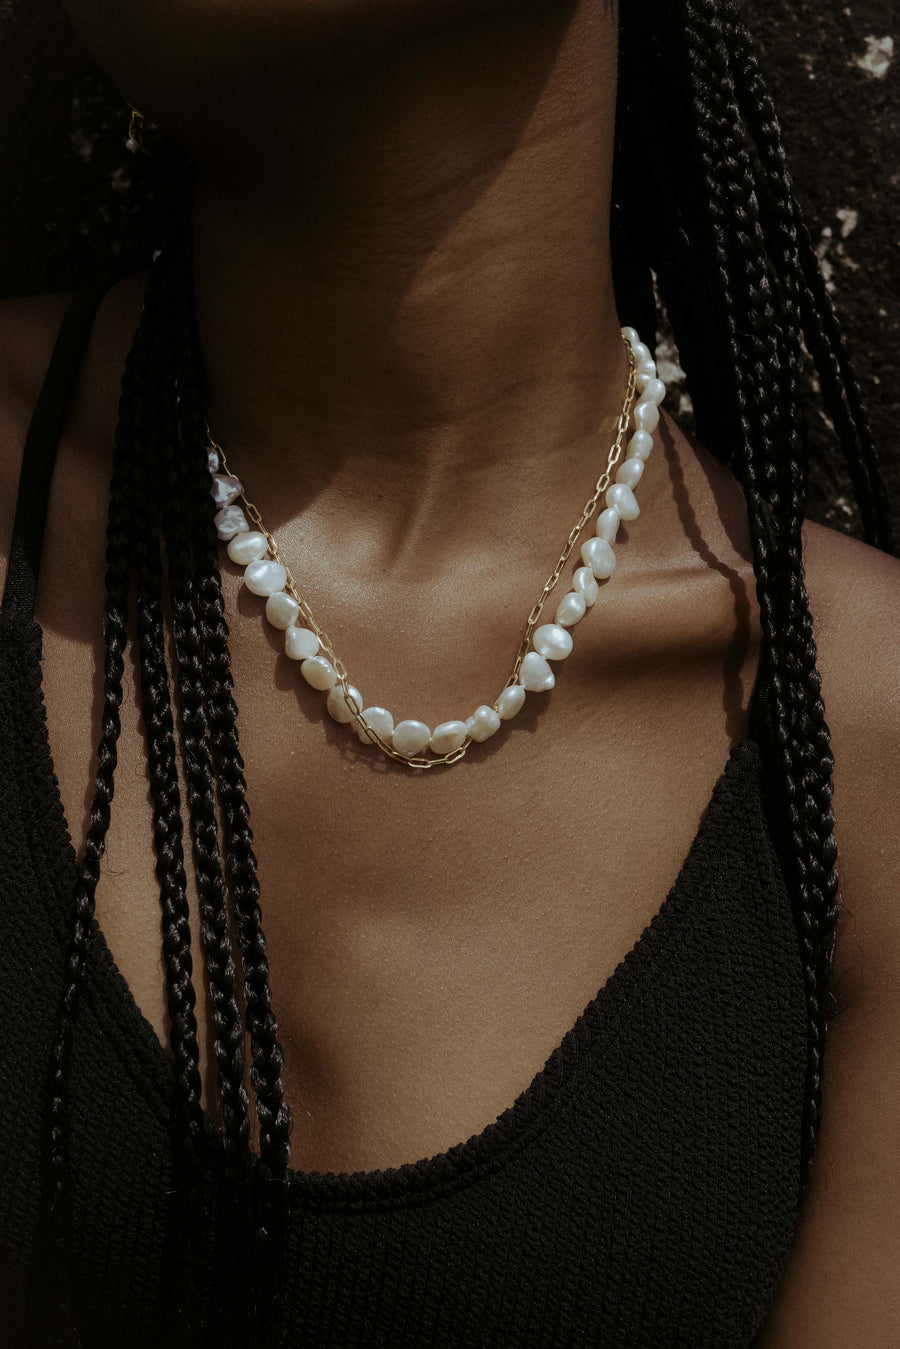 The Freeform Pearl Necklace